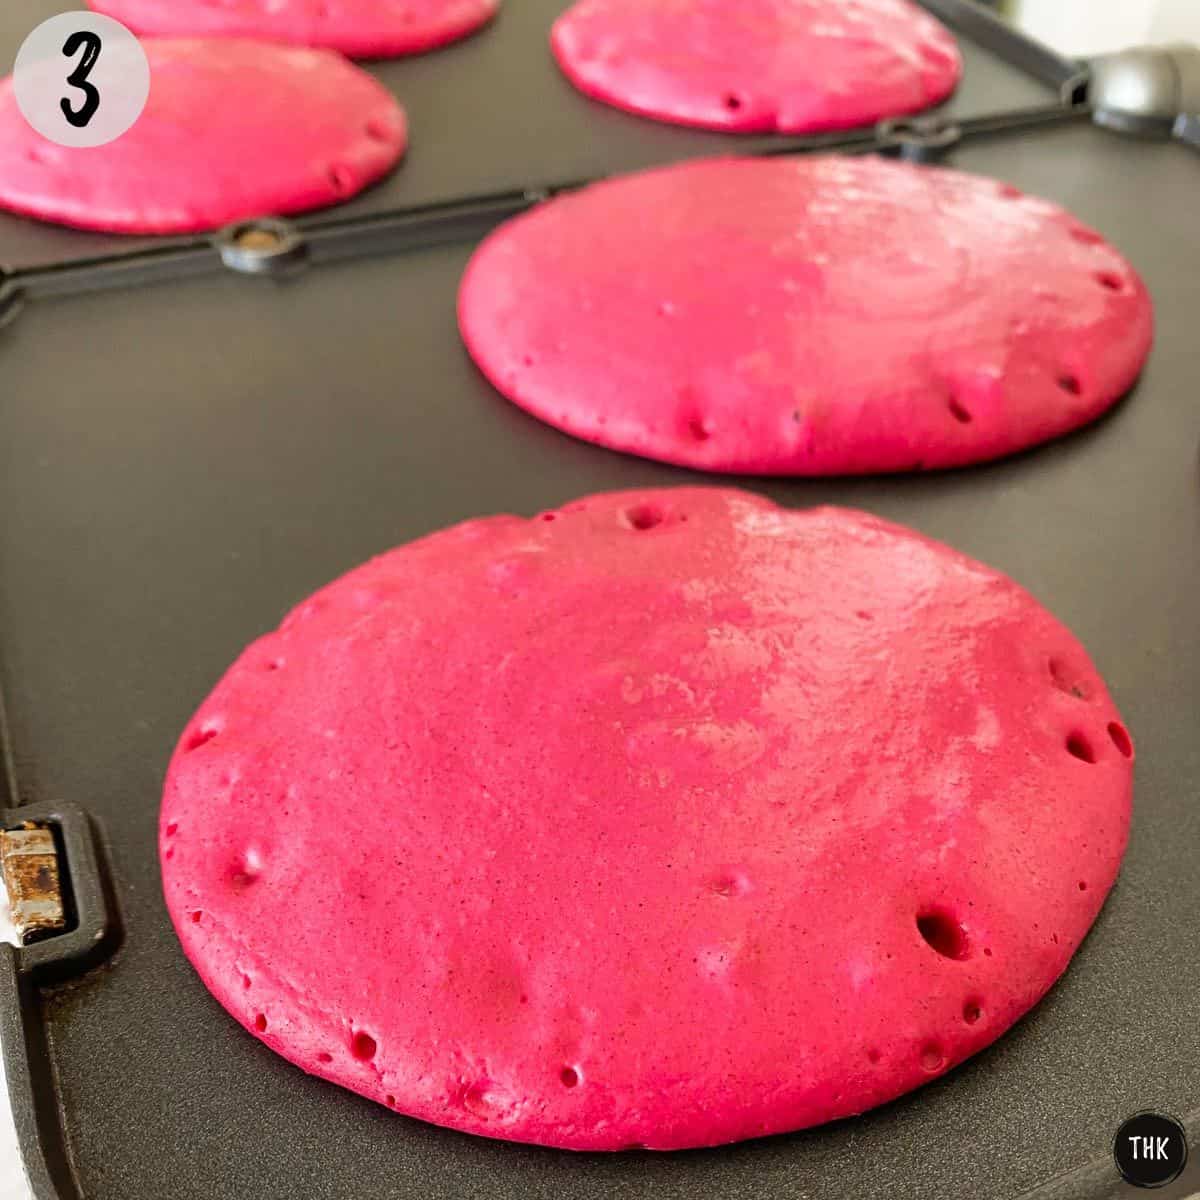 Pink pancakes cooking on griddle.